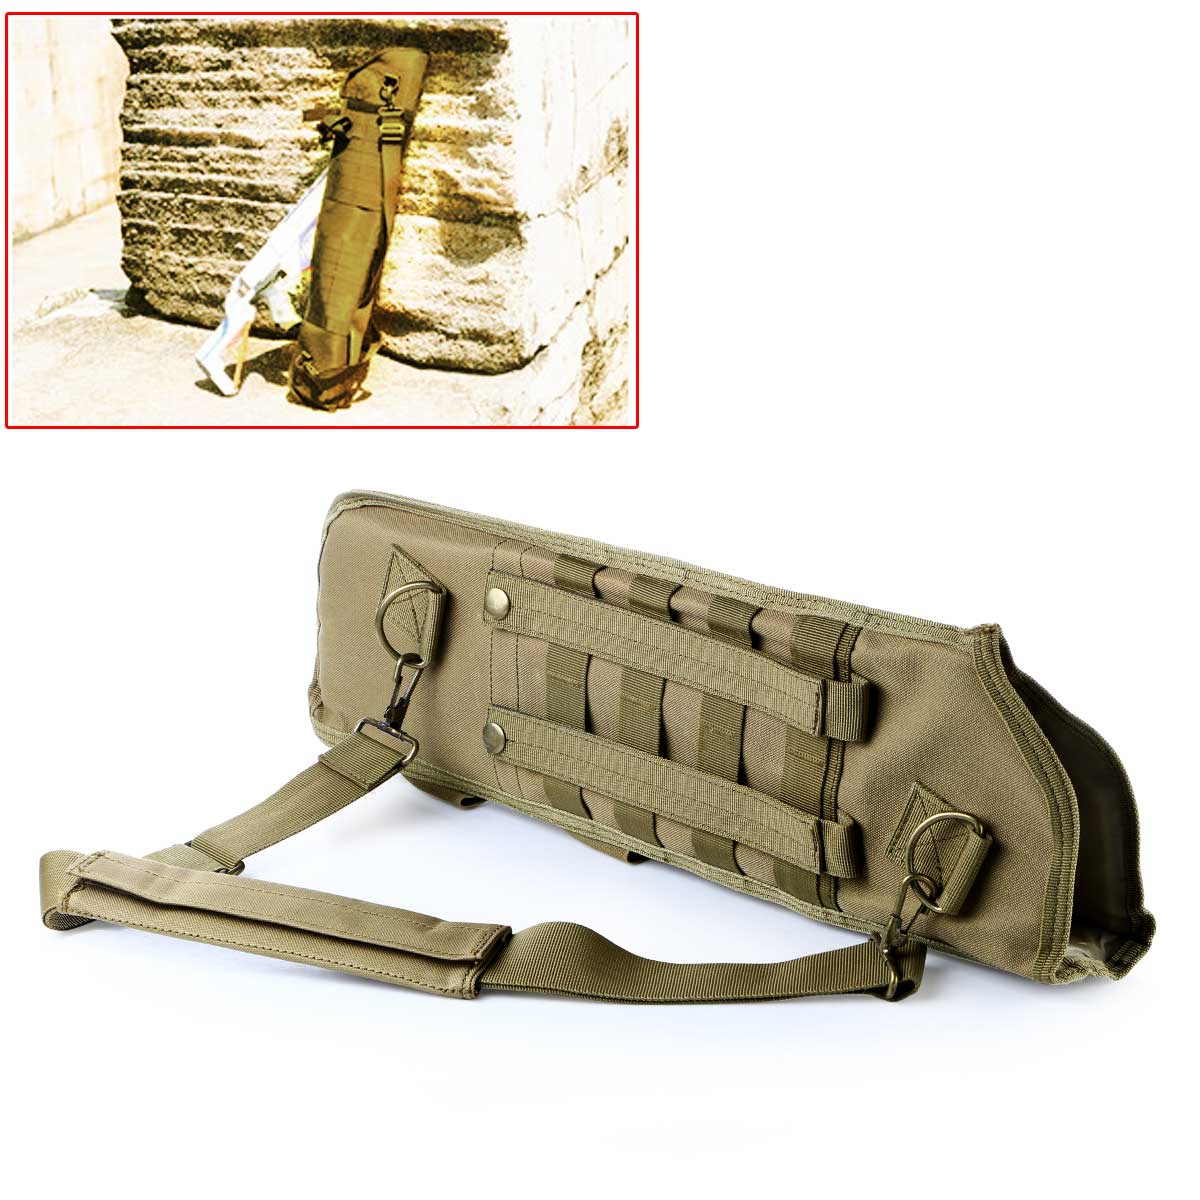 Adjustable Military Tactical Shoulder Rifle Pouch Gun Holster For Ak 47